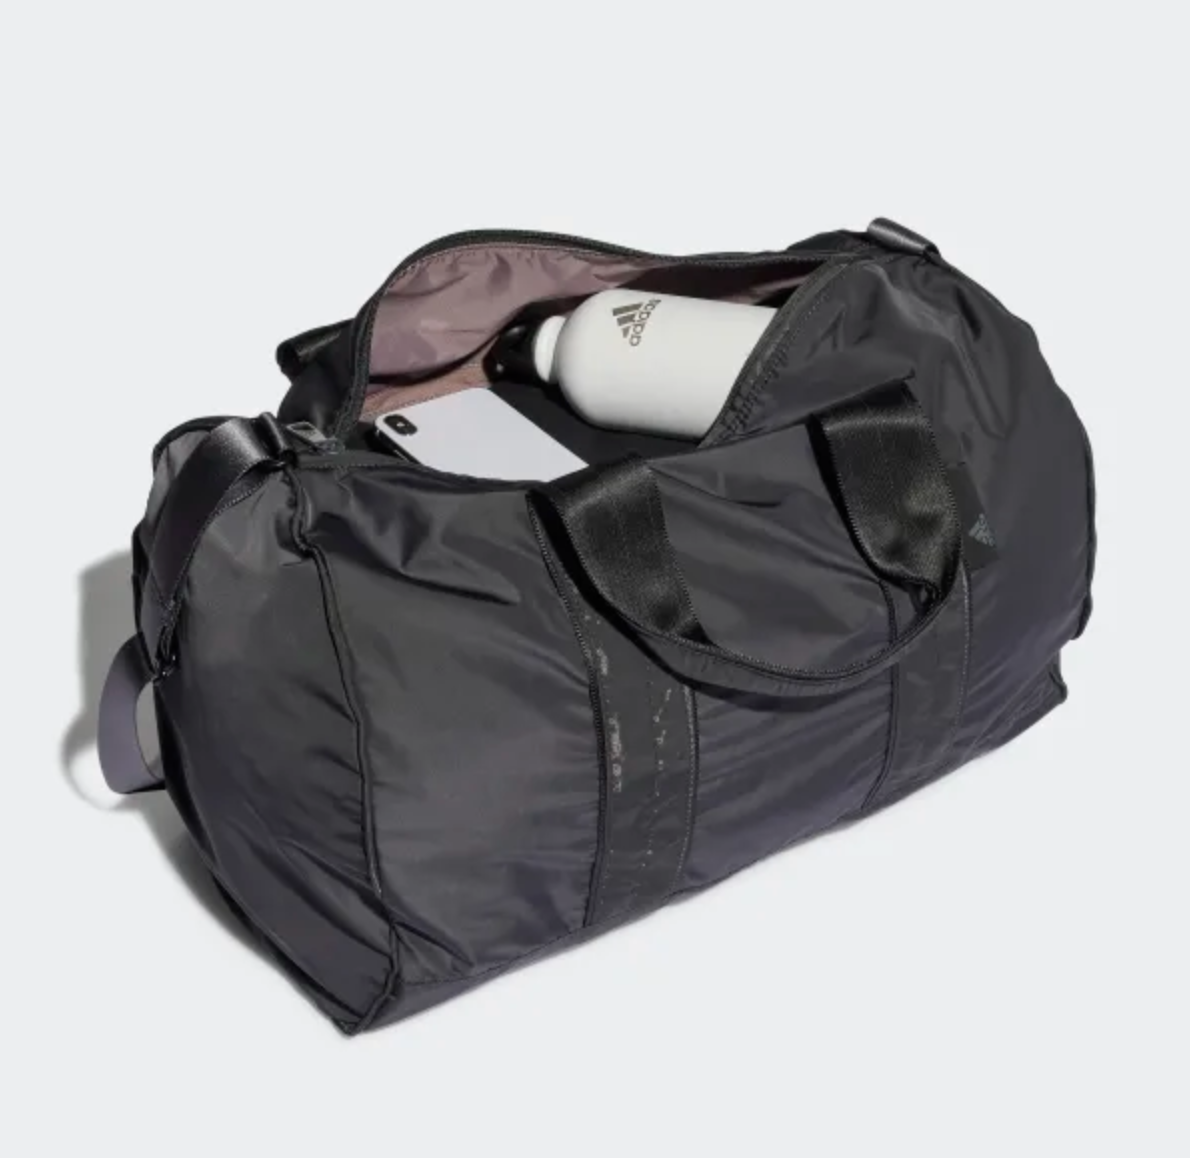 the duffel bag open to show how much stuff can fit inside